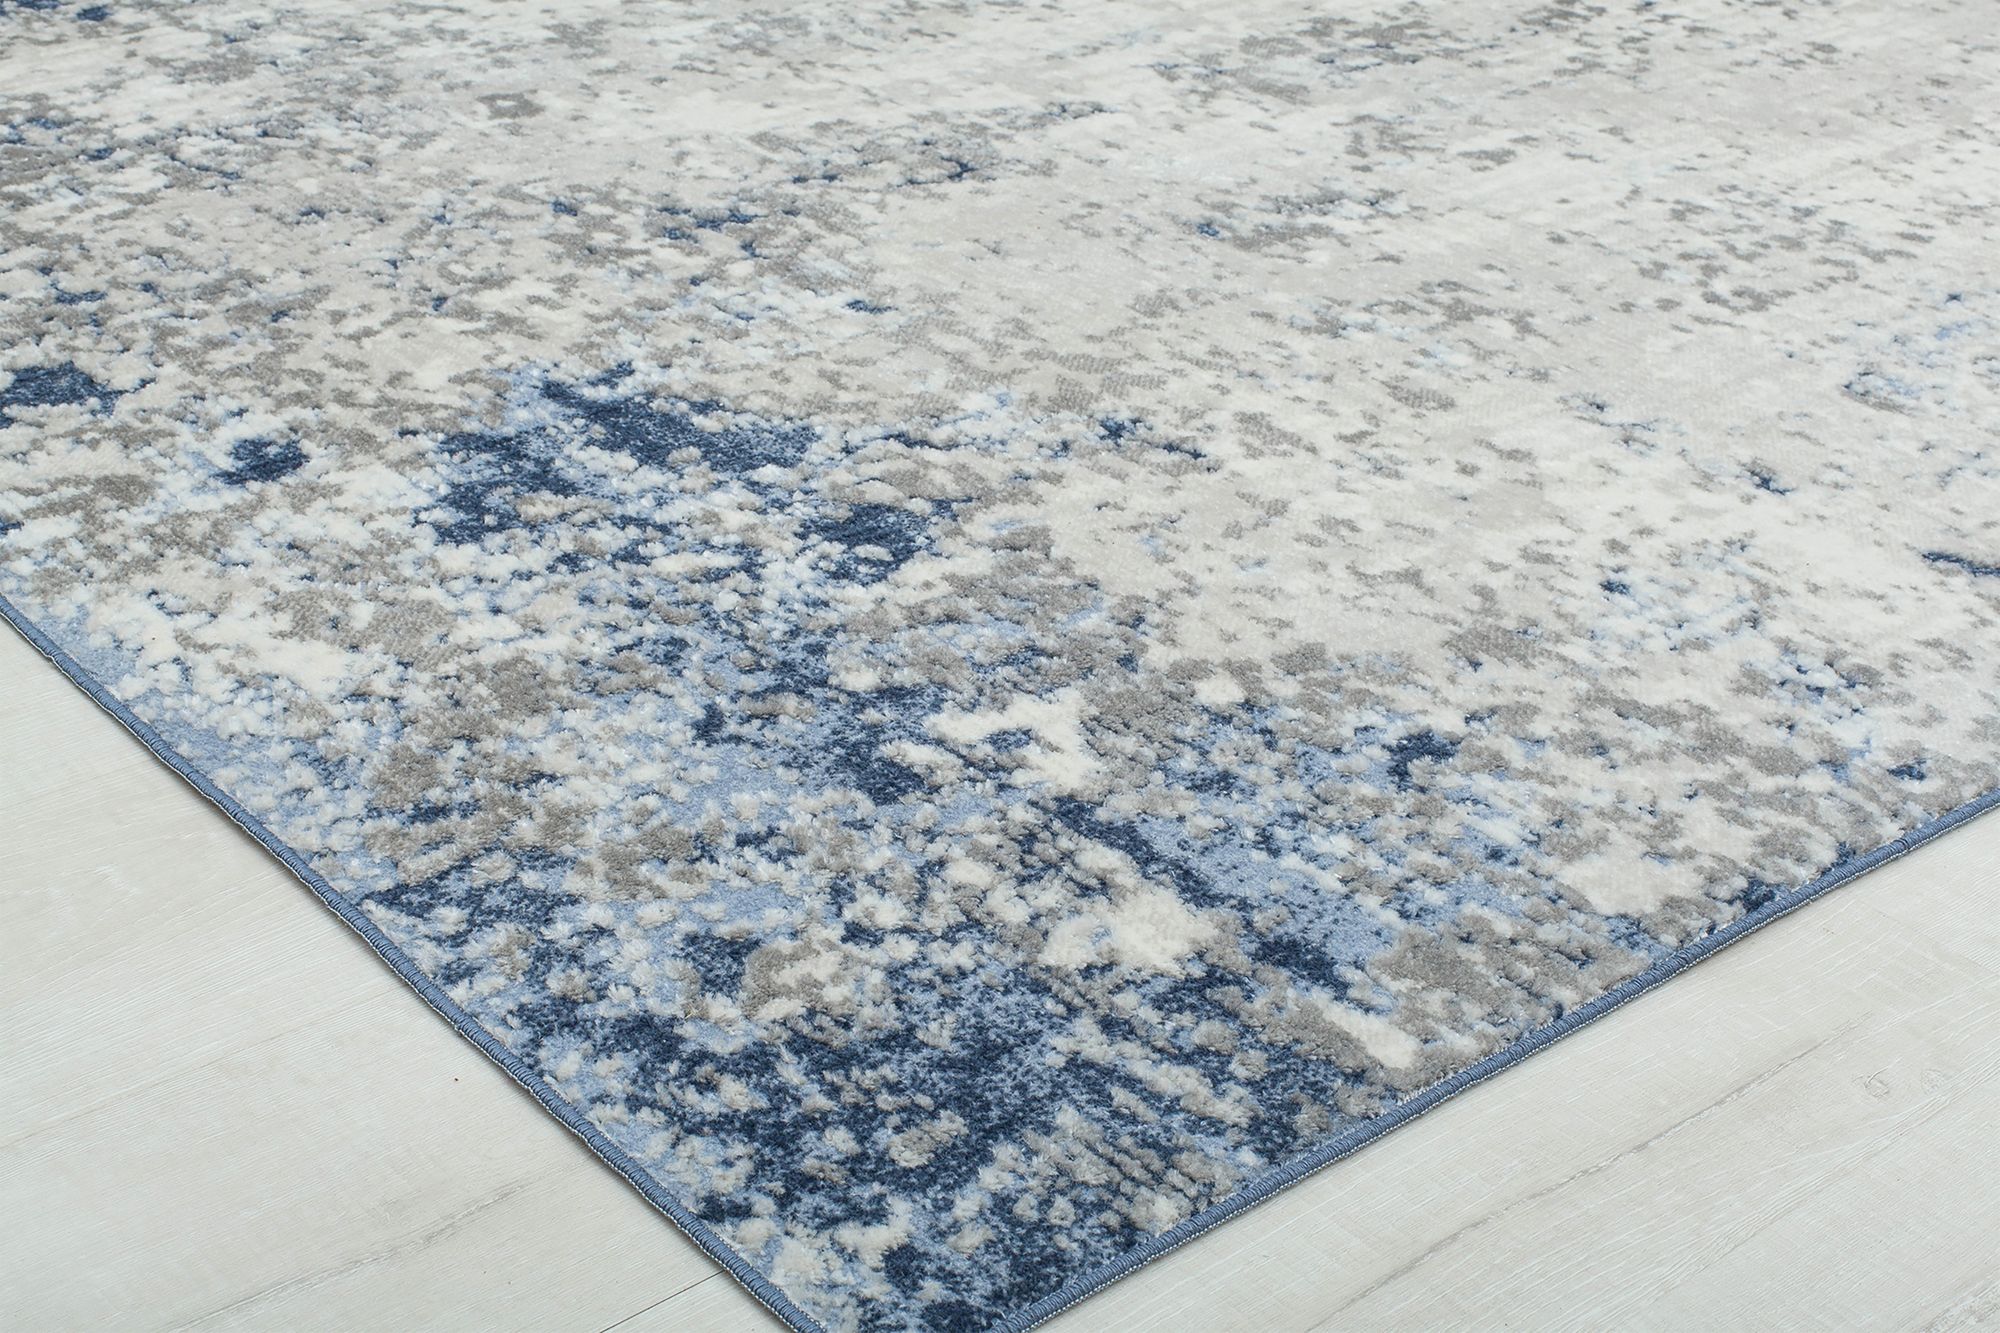 Close-up view of a Prescott mottled cobalt blue rug, showing detailed texture and corner placement on a light-colored floor.